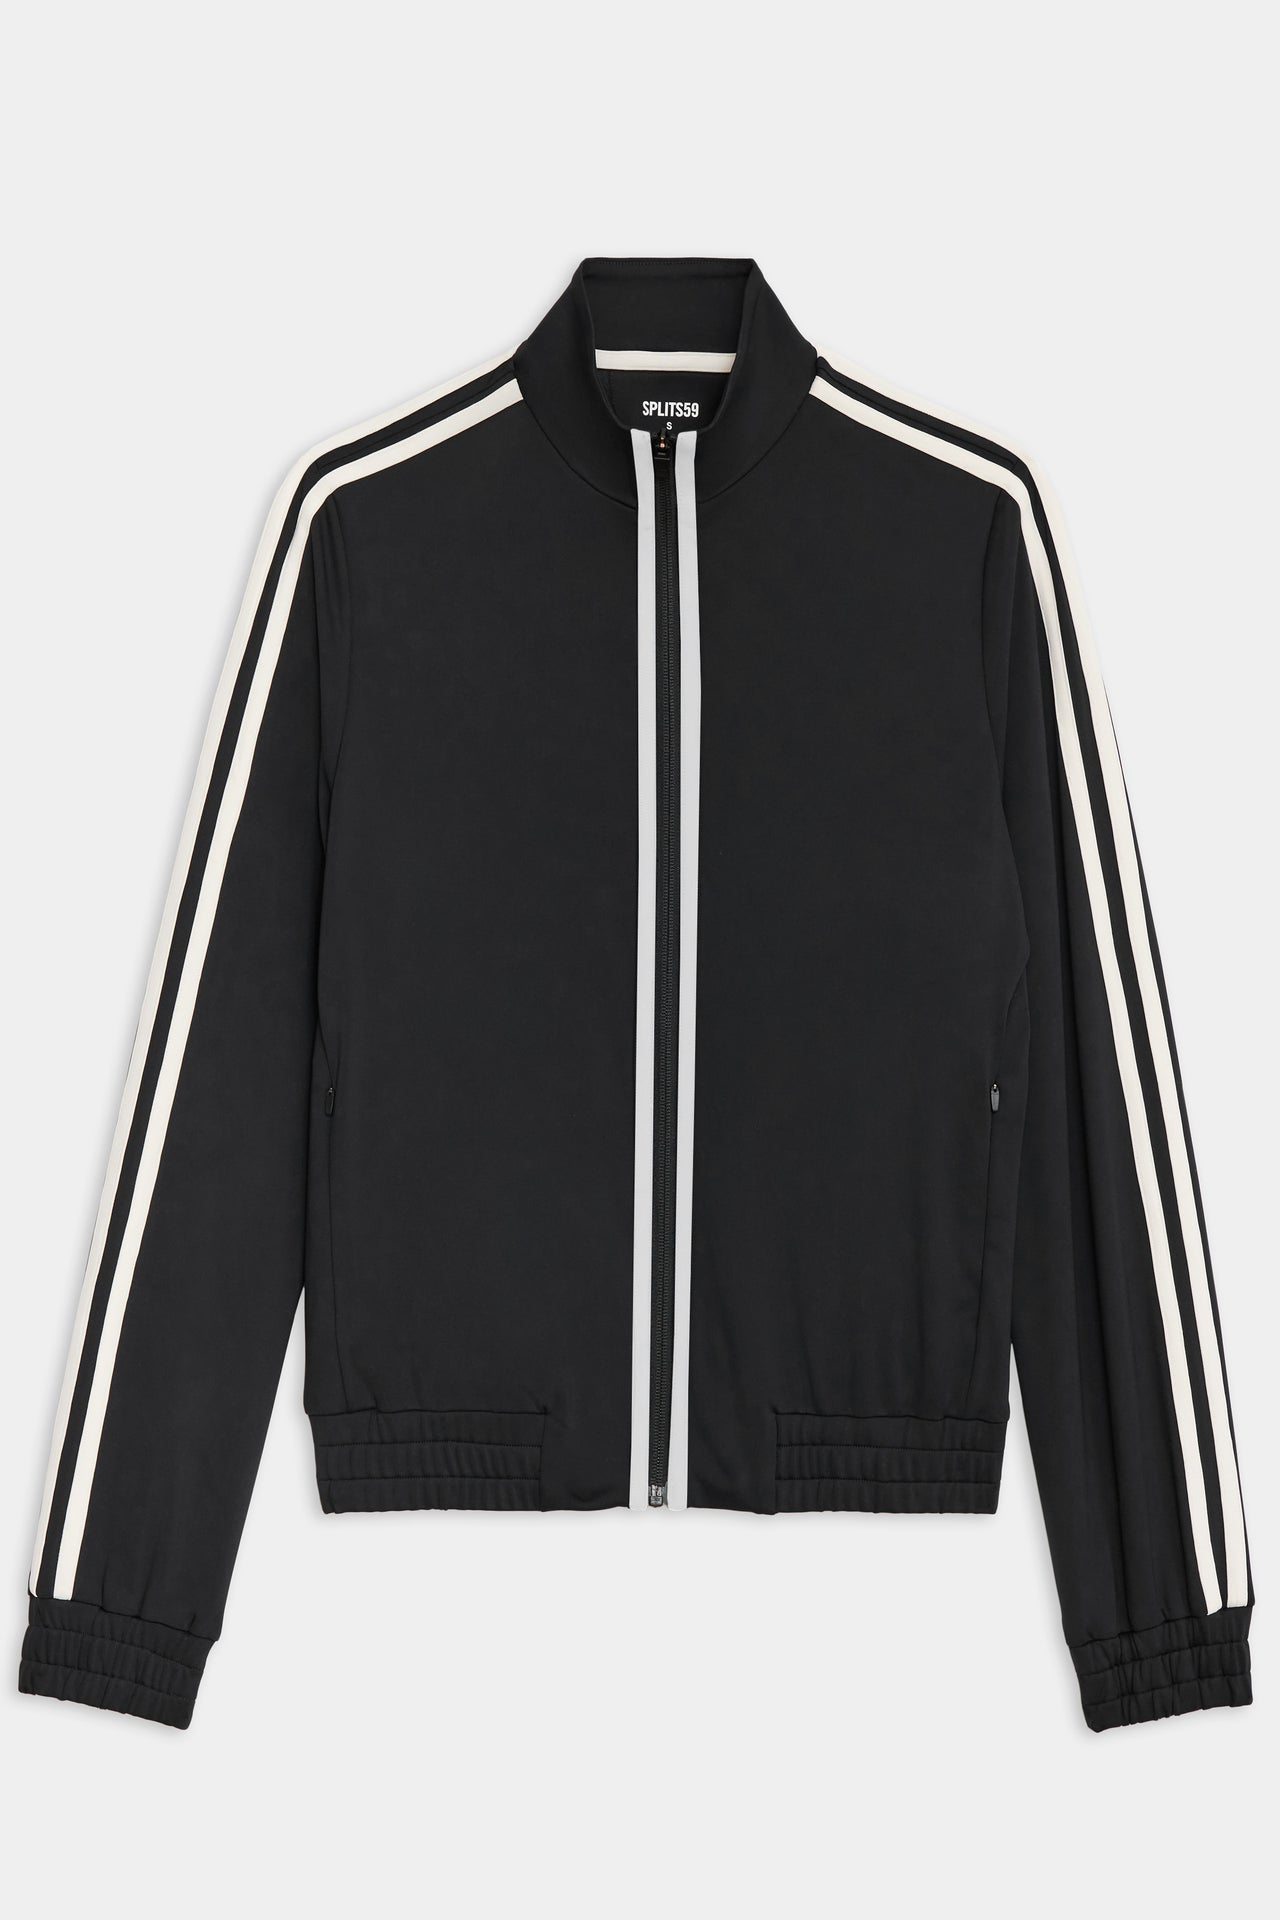 Flat view view of black zip jacket that stops under chin with two white stripes down the side and the front 